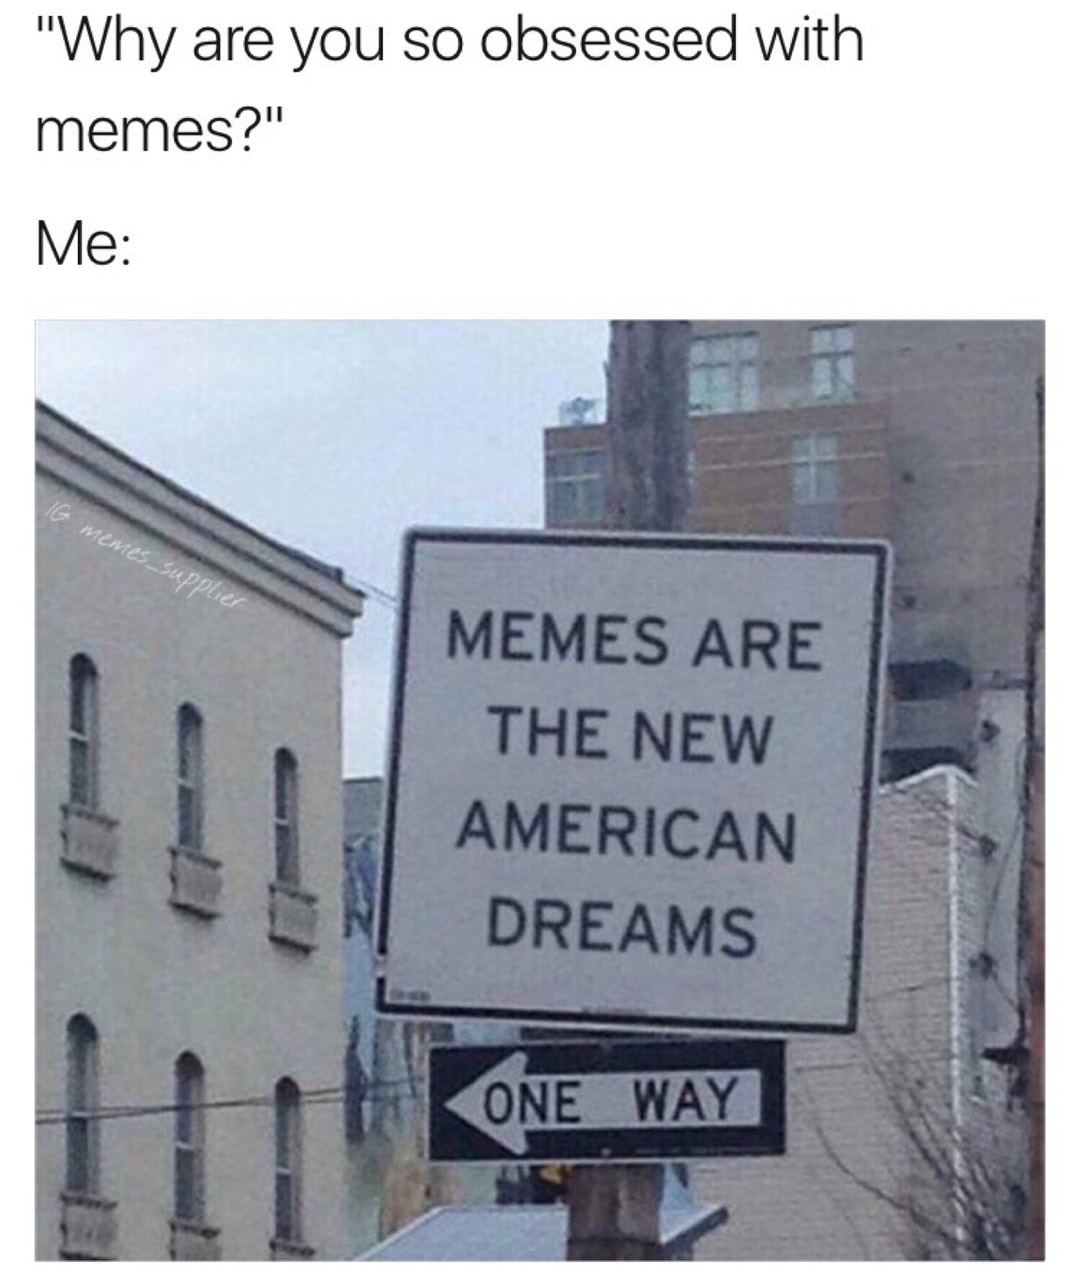 city one real estate - "Why are you so obsessed with memes?" Me Ig Memes Memes Are The New American Dreams One Way